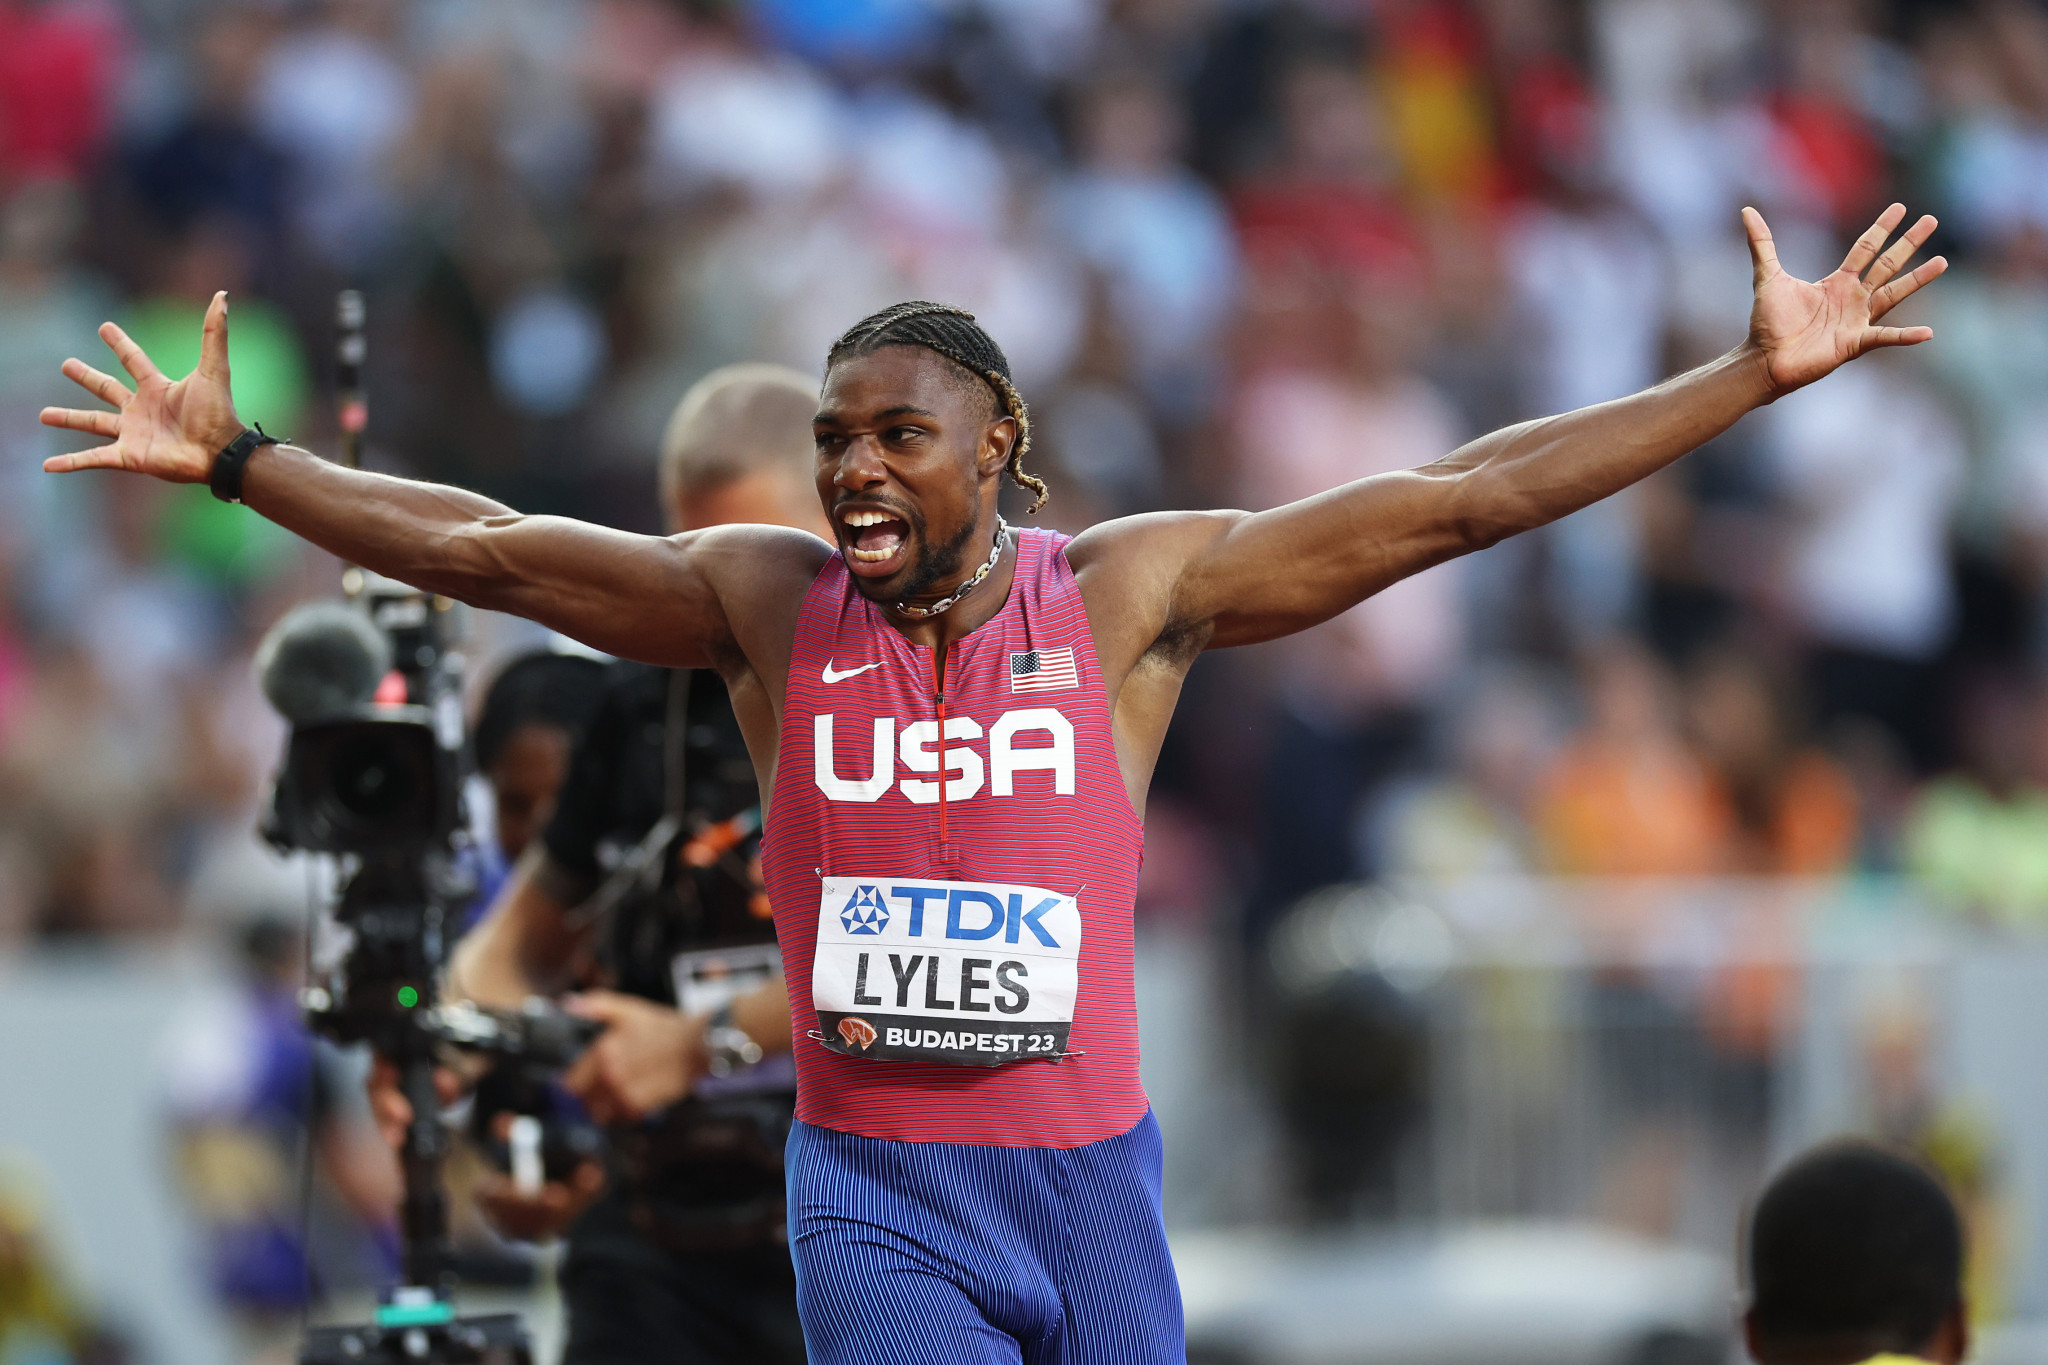 The United States' Noah Lyles powered his way to men's 100m gold in the last race of the day ©Getty Images